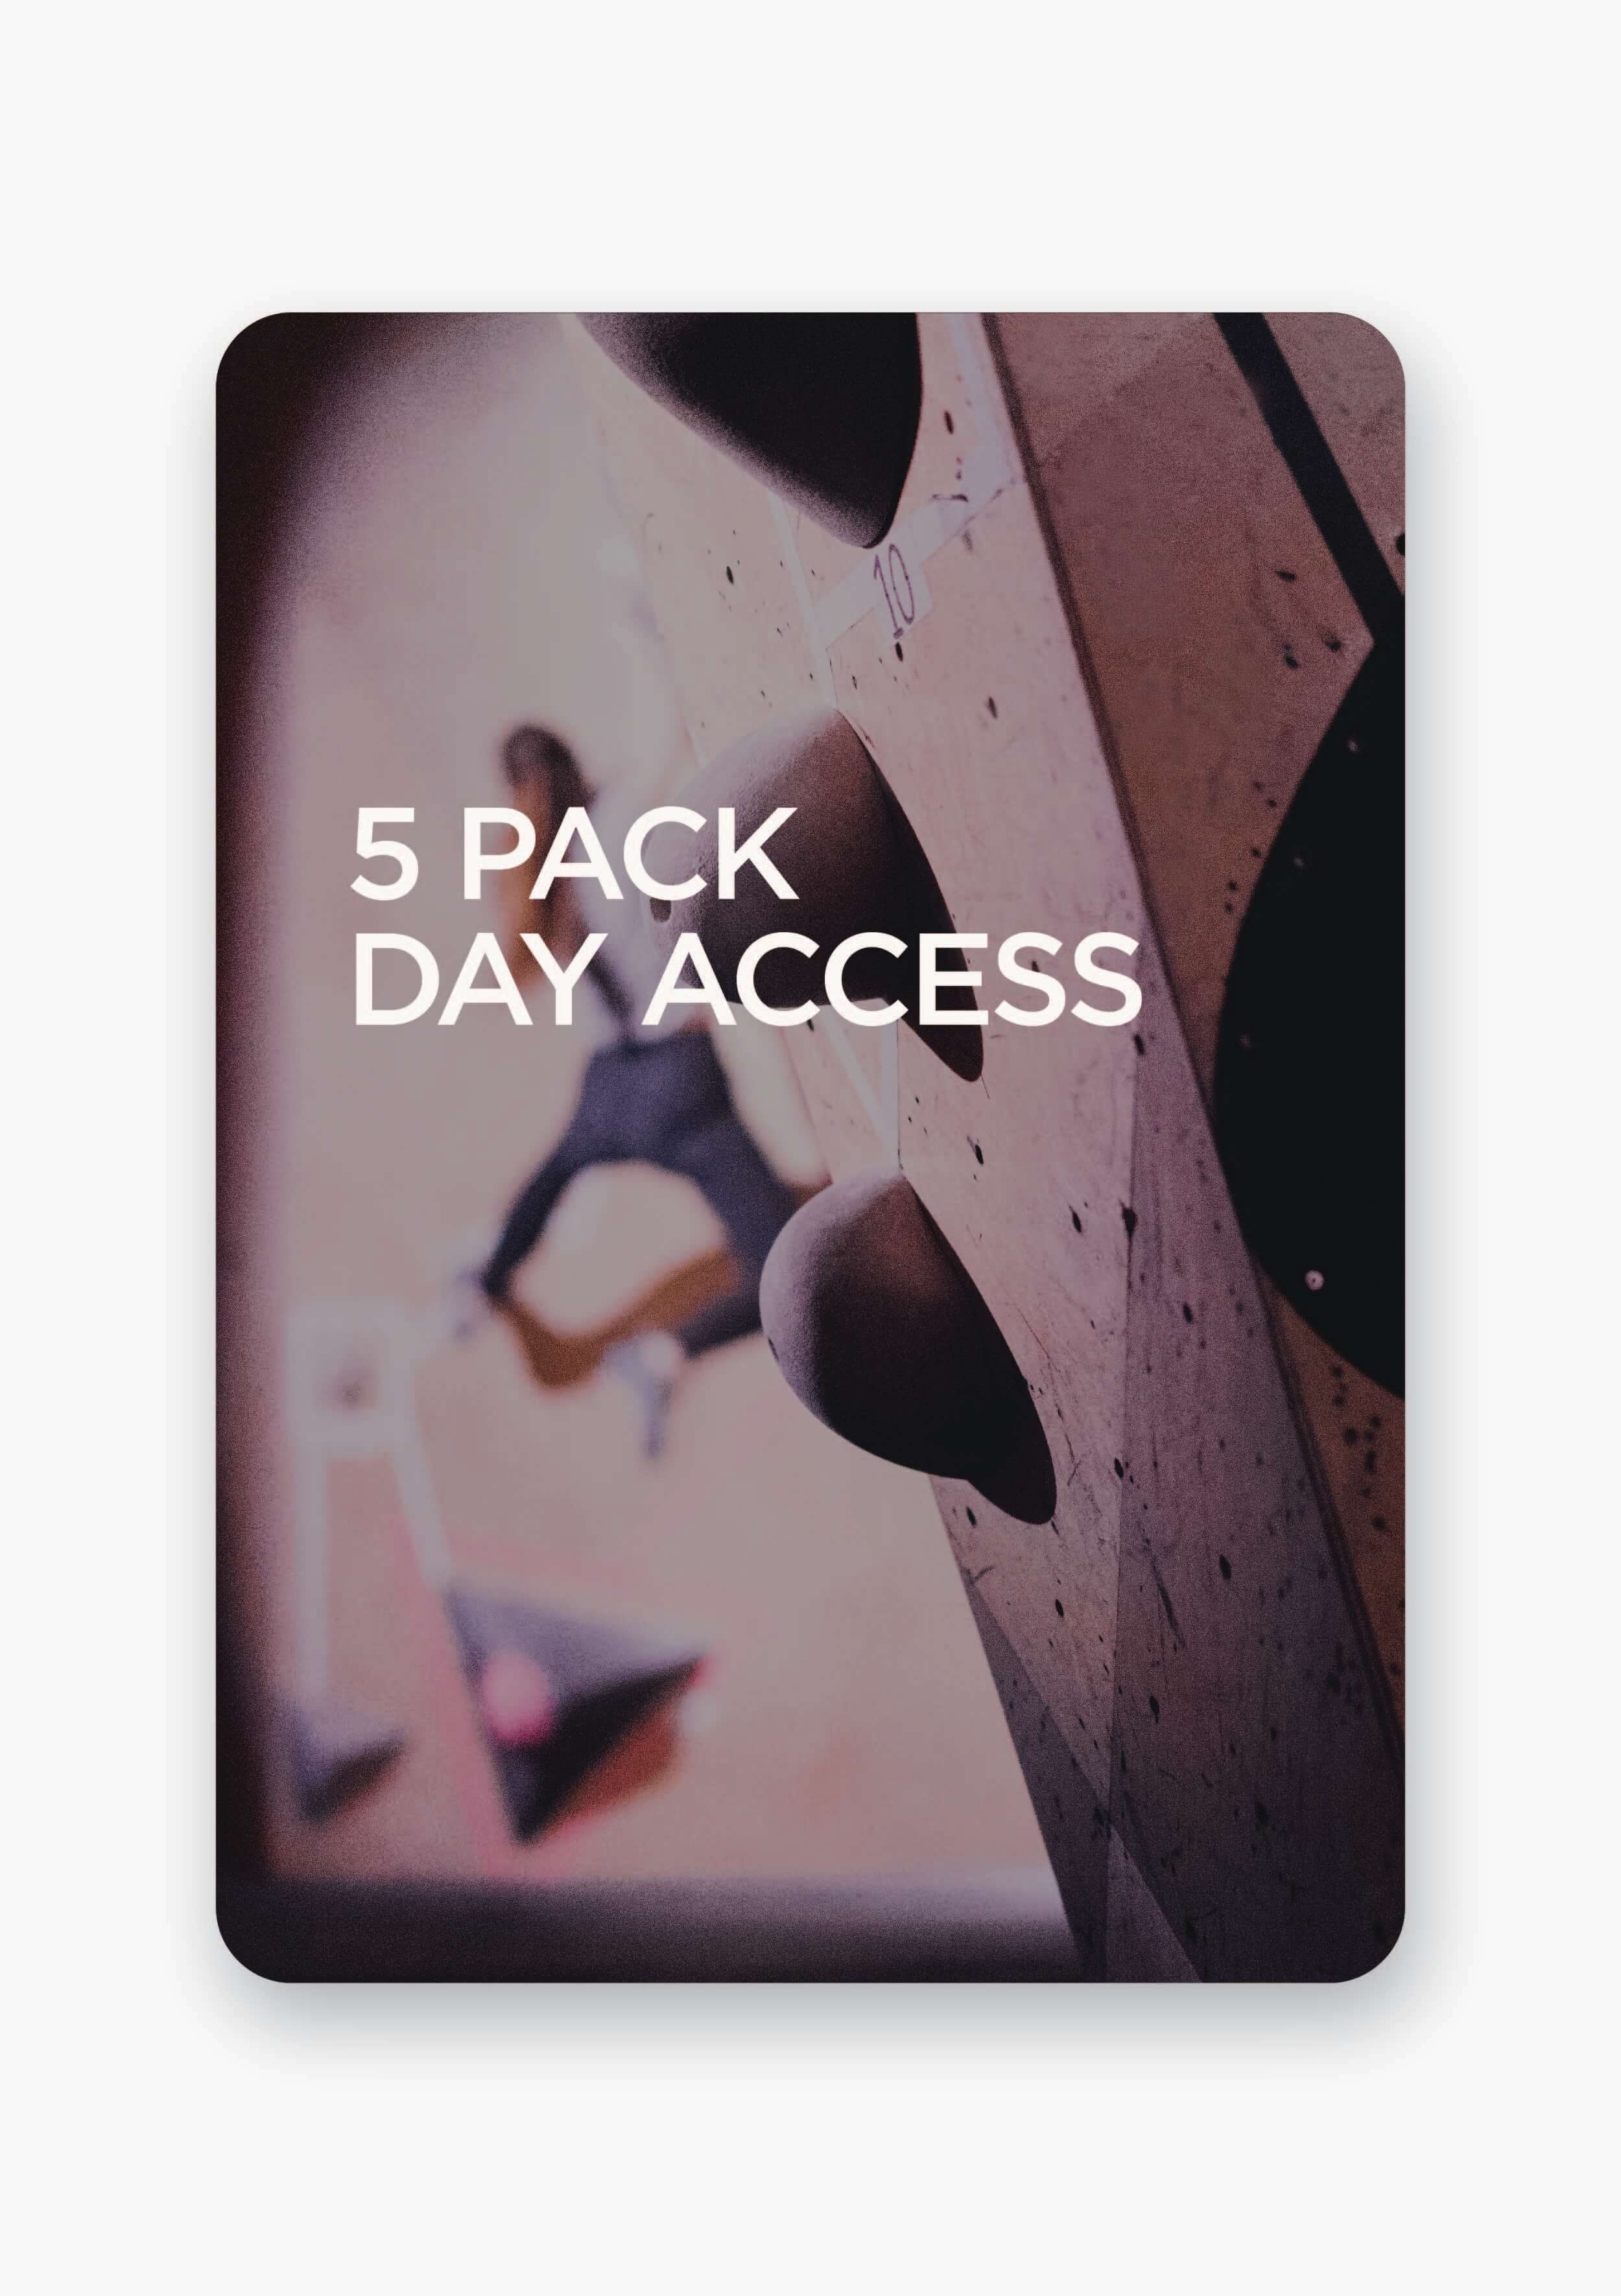 5 PACK DAY ACCESS